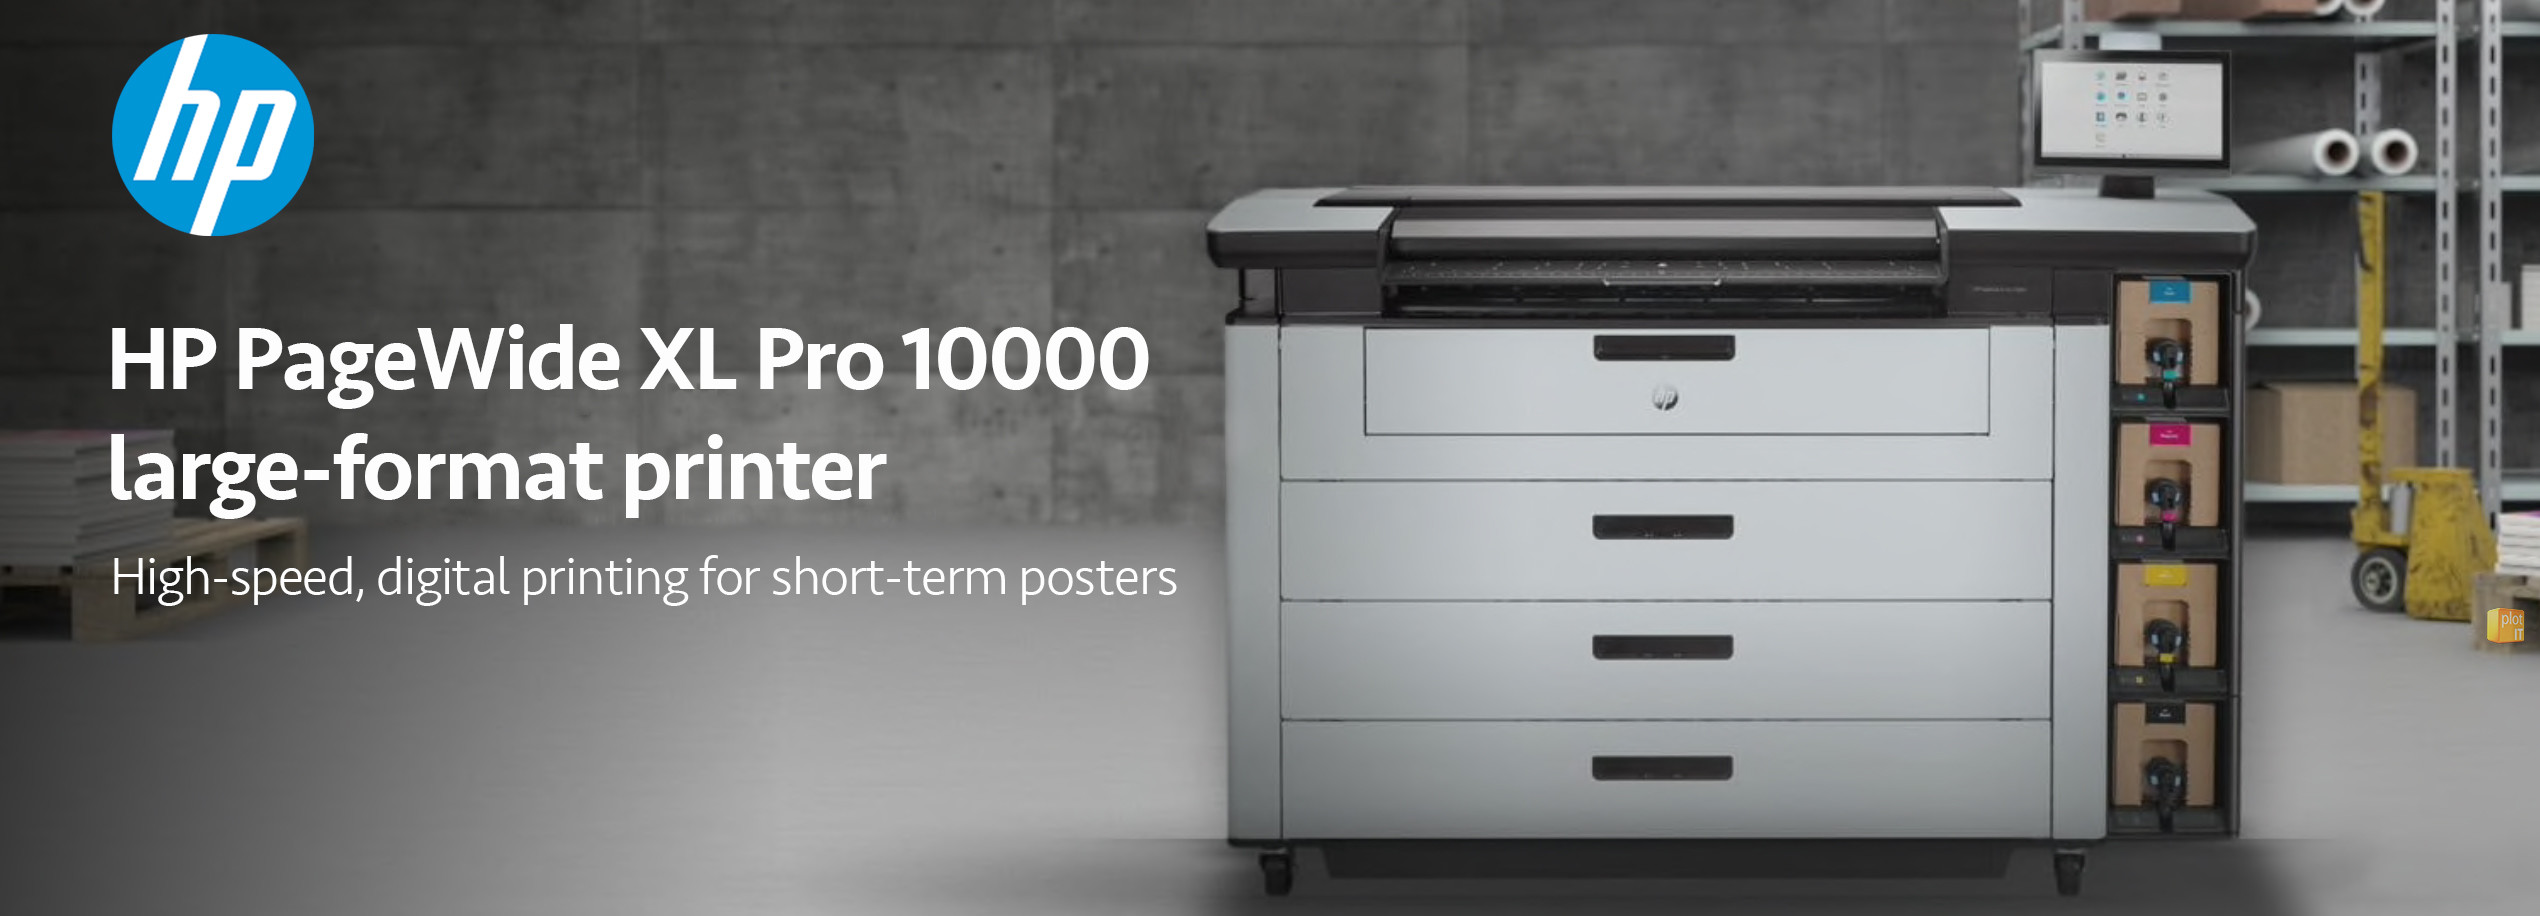 HP PageWide XL Pro 10000 MAIN BANNER